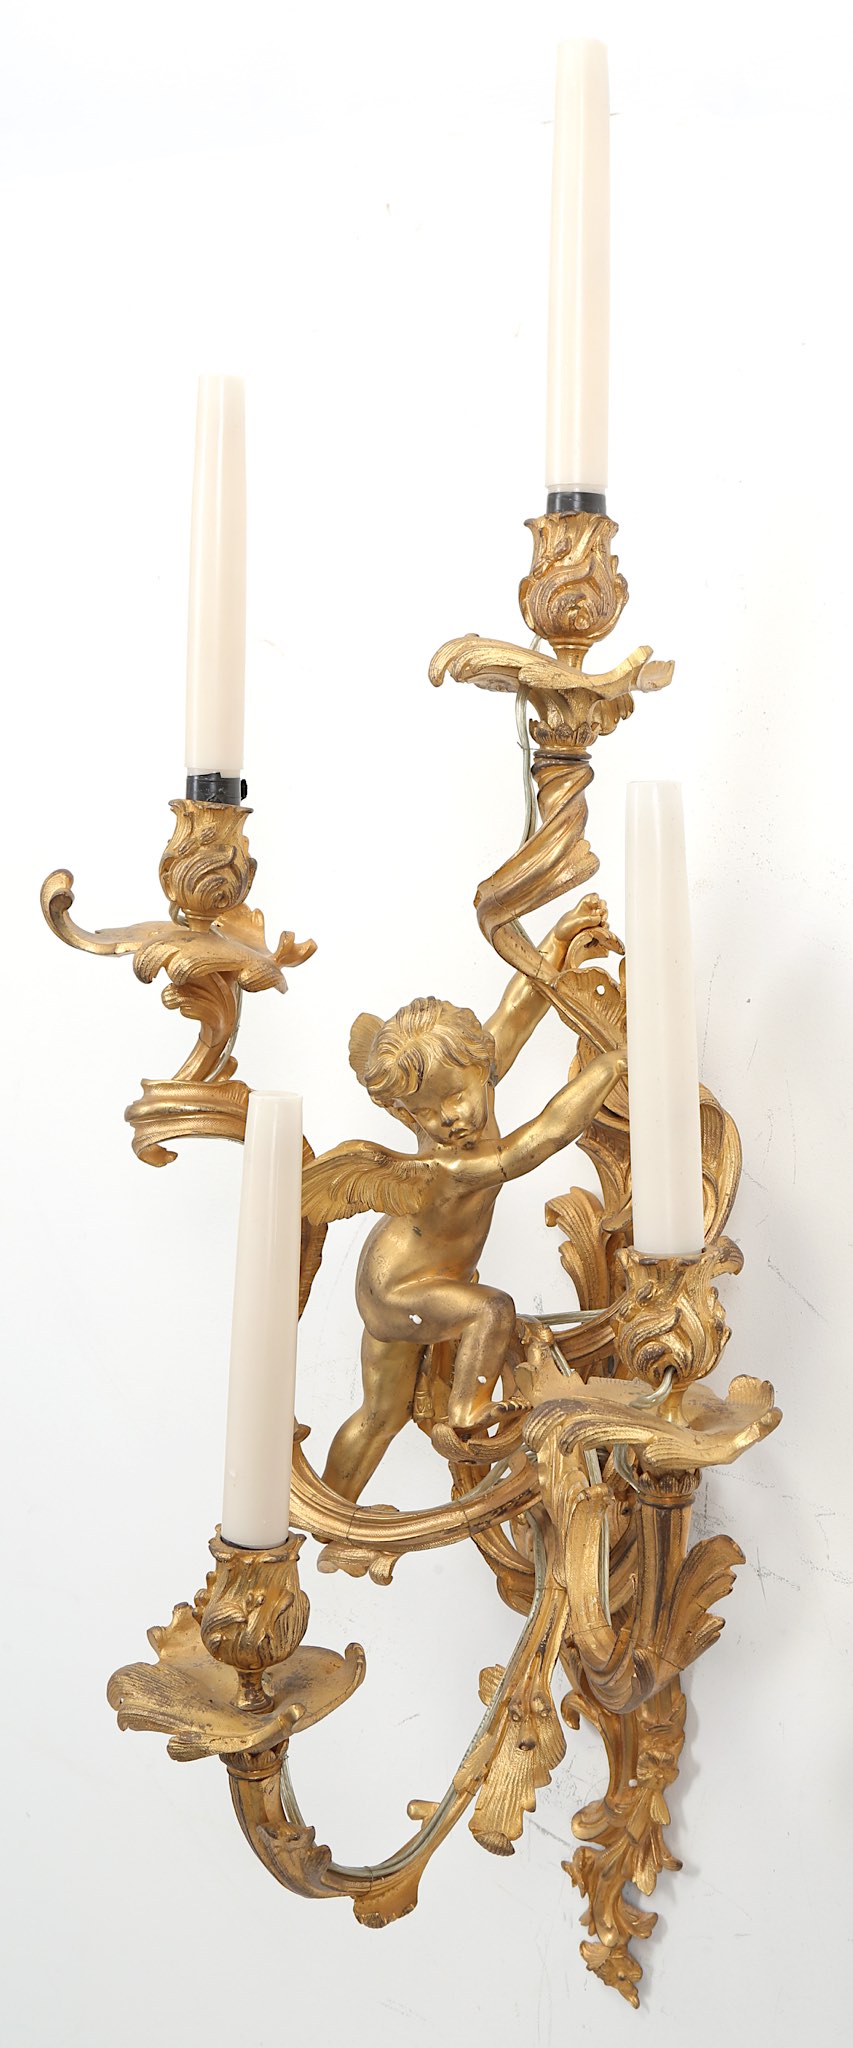 A LARGE AND IMPRESSIVE PAIR OF 19TH CENTURY FRENCH GILT BRONZE FIGURAL WALL LIGHTS IN THE ROCOCO - Image 7 of 7